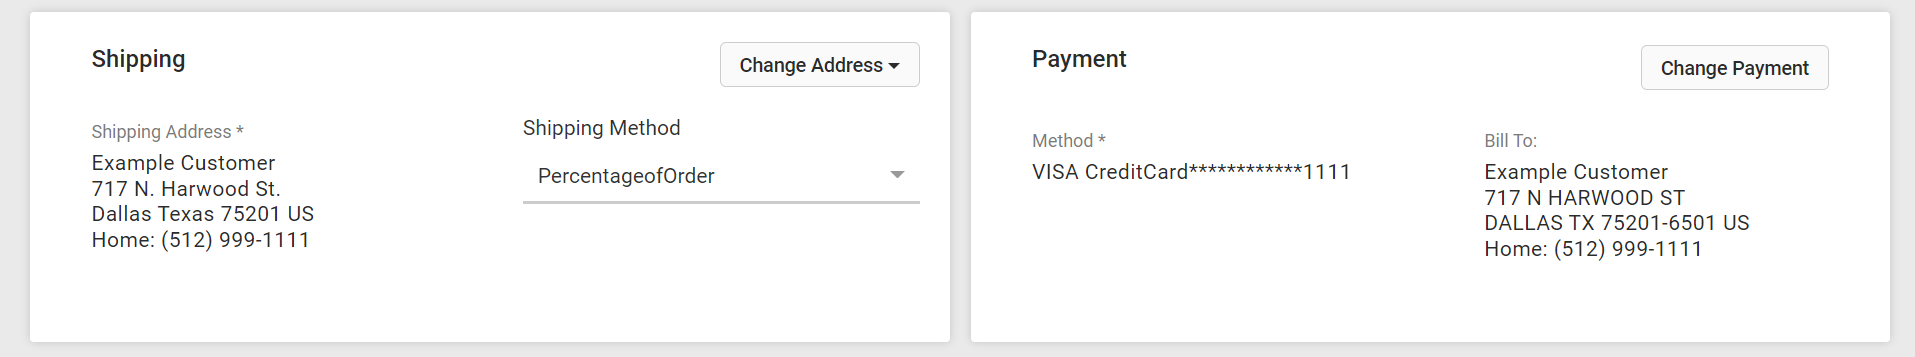 The shipping and payment sections of subscription details